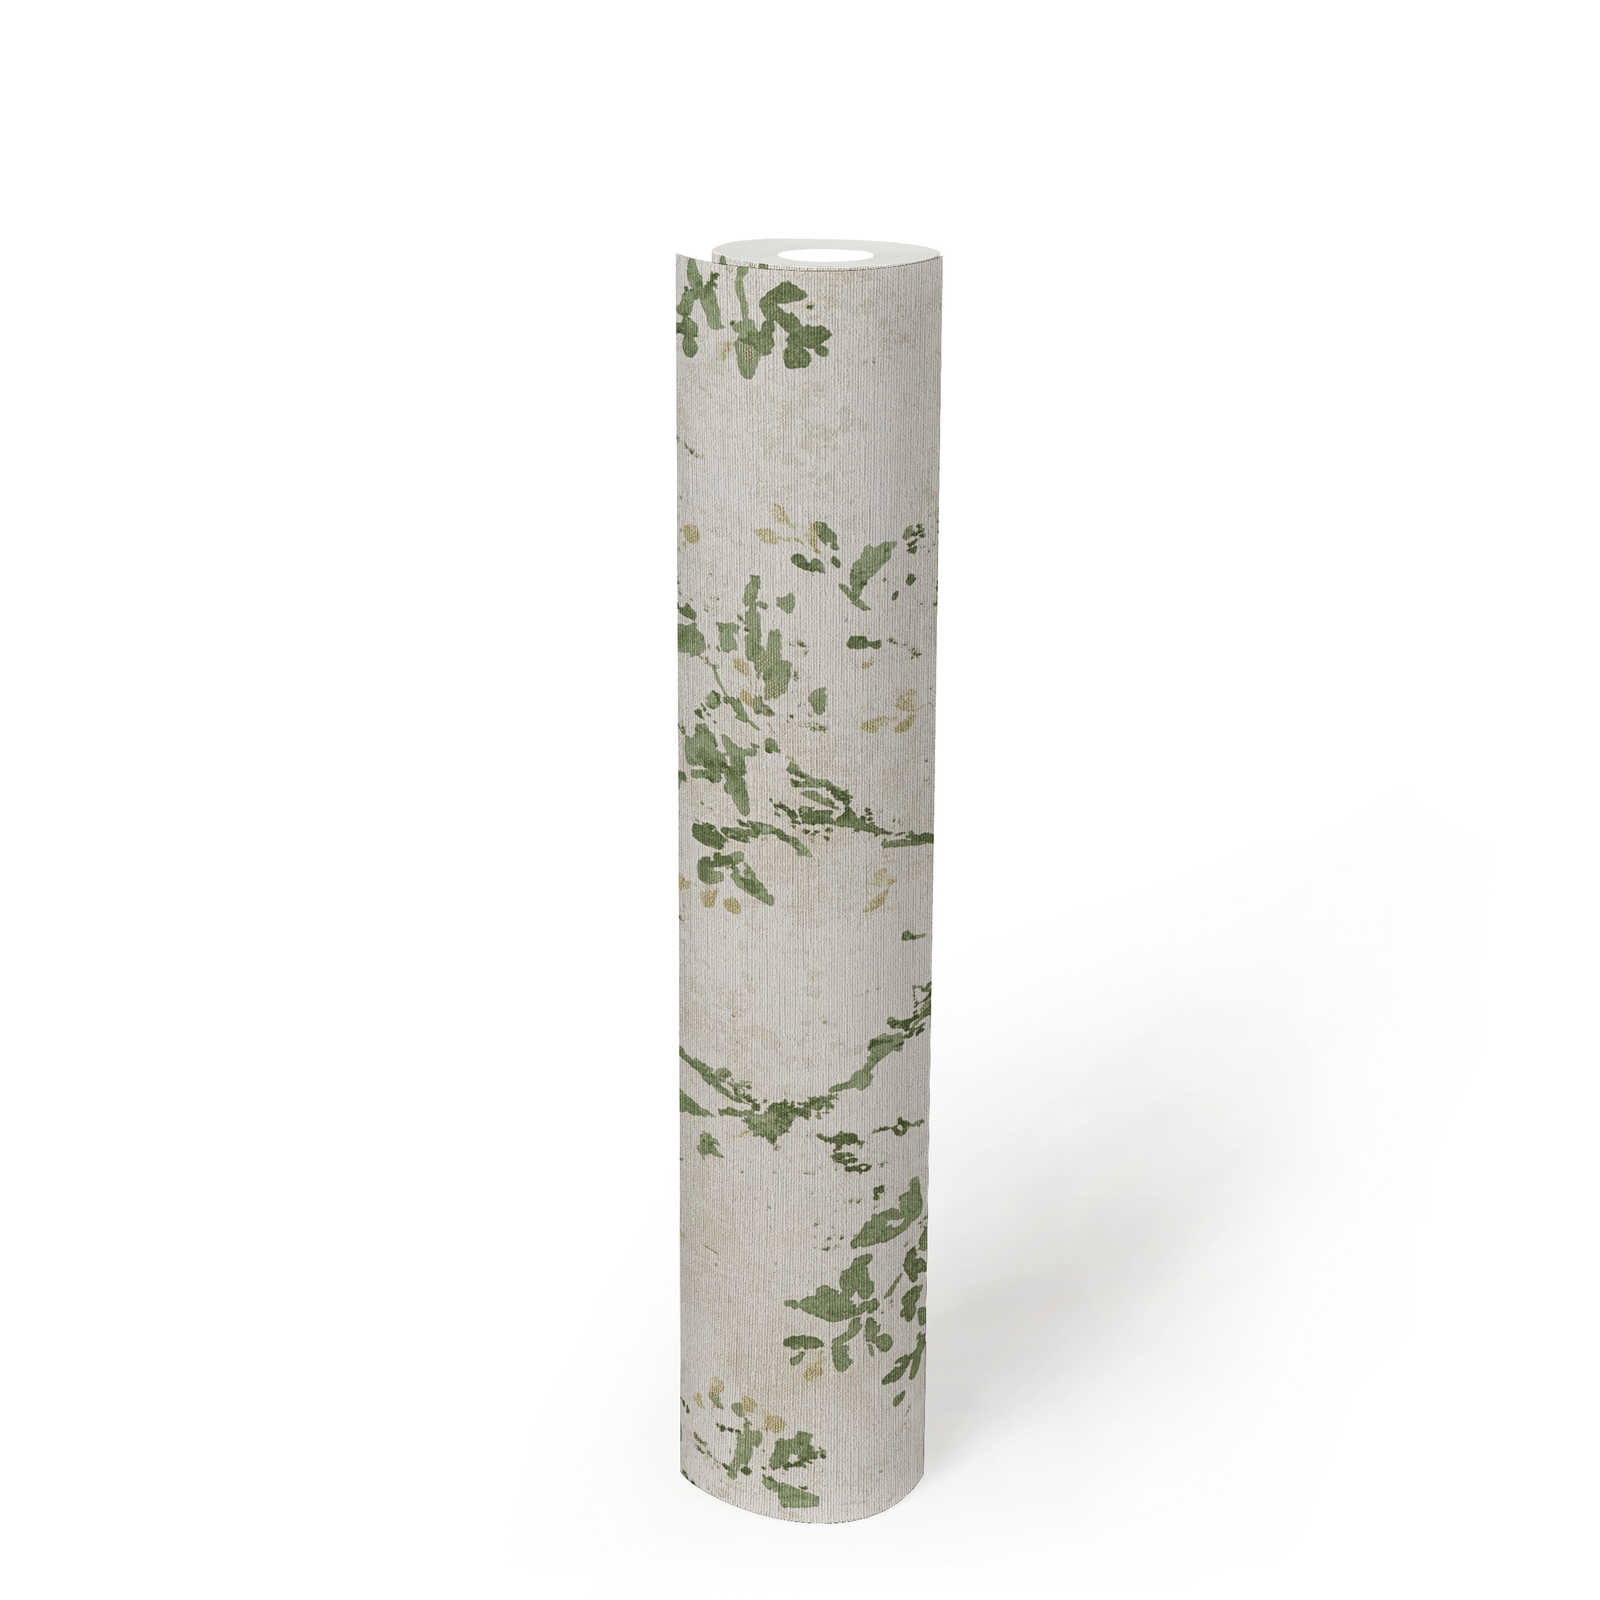             Non-woven wallpaper with a playful floral pattern - beige, green, gold
        